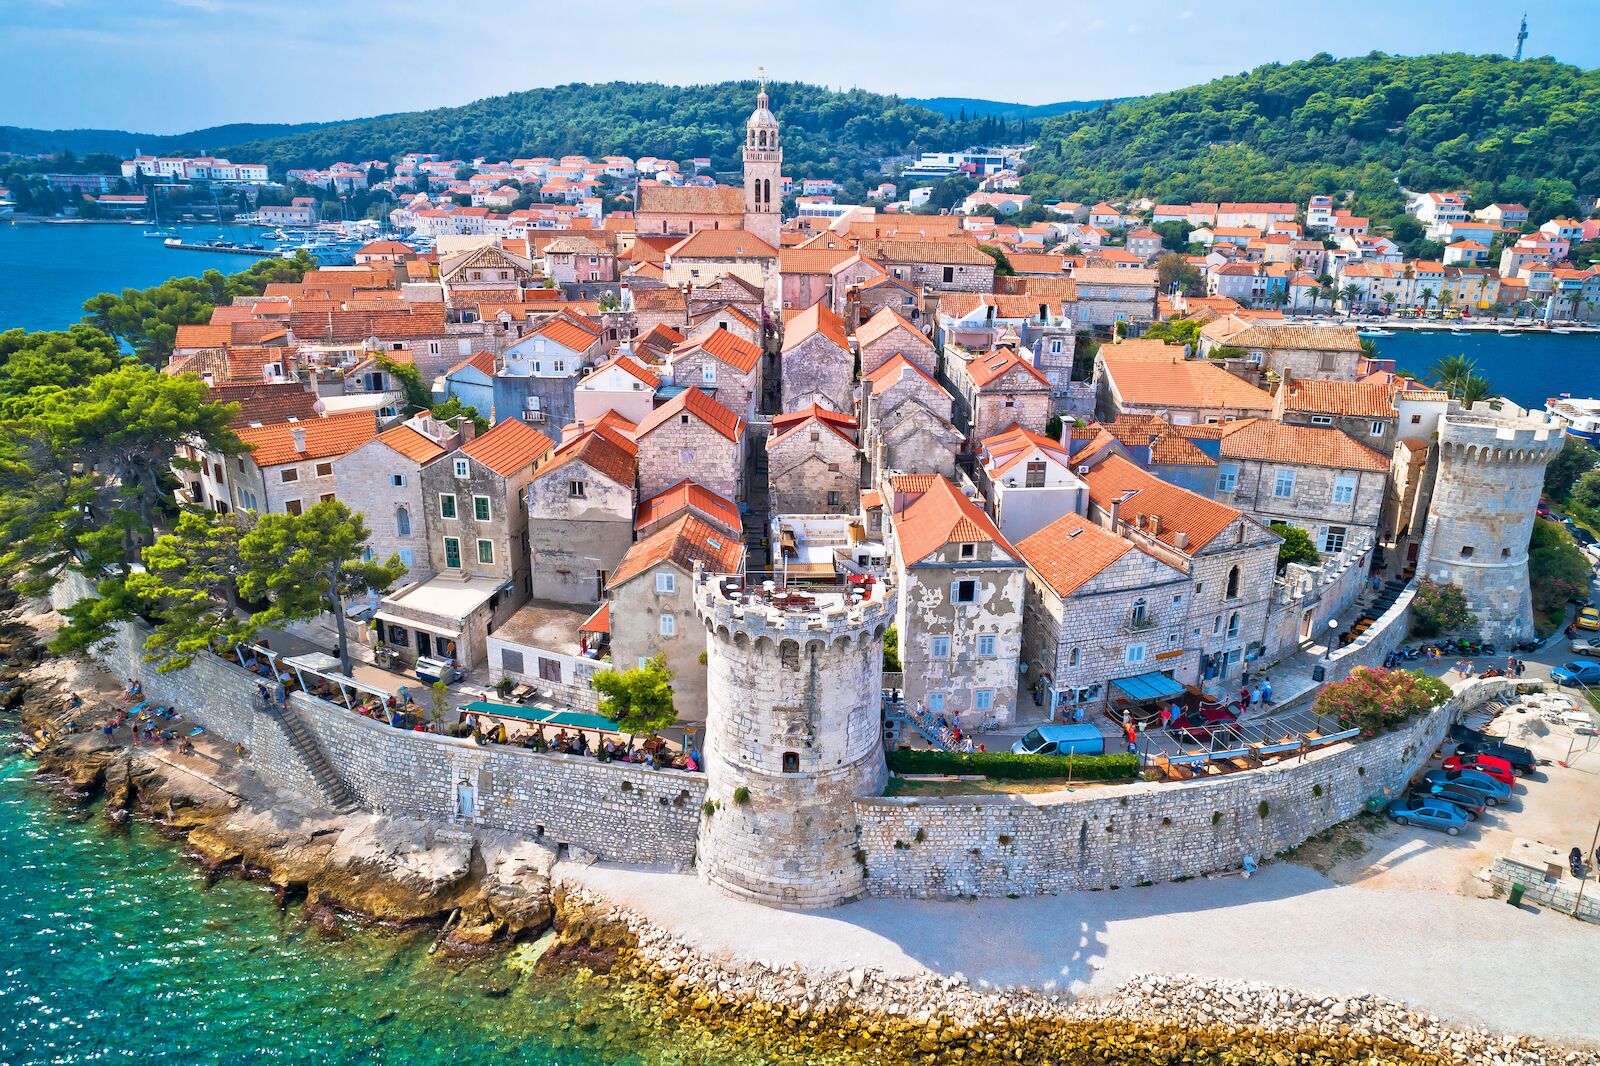 The walled city of Korcula on Korcula Island, with red tiled roofs, where people go for day trips from Dubrovnik